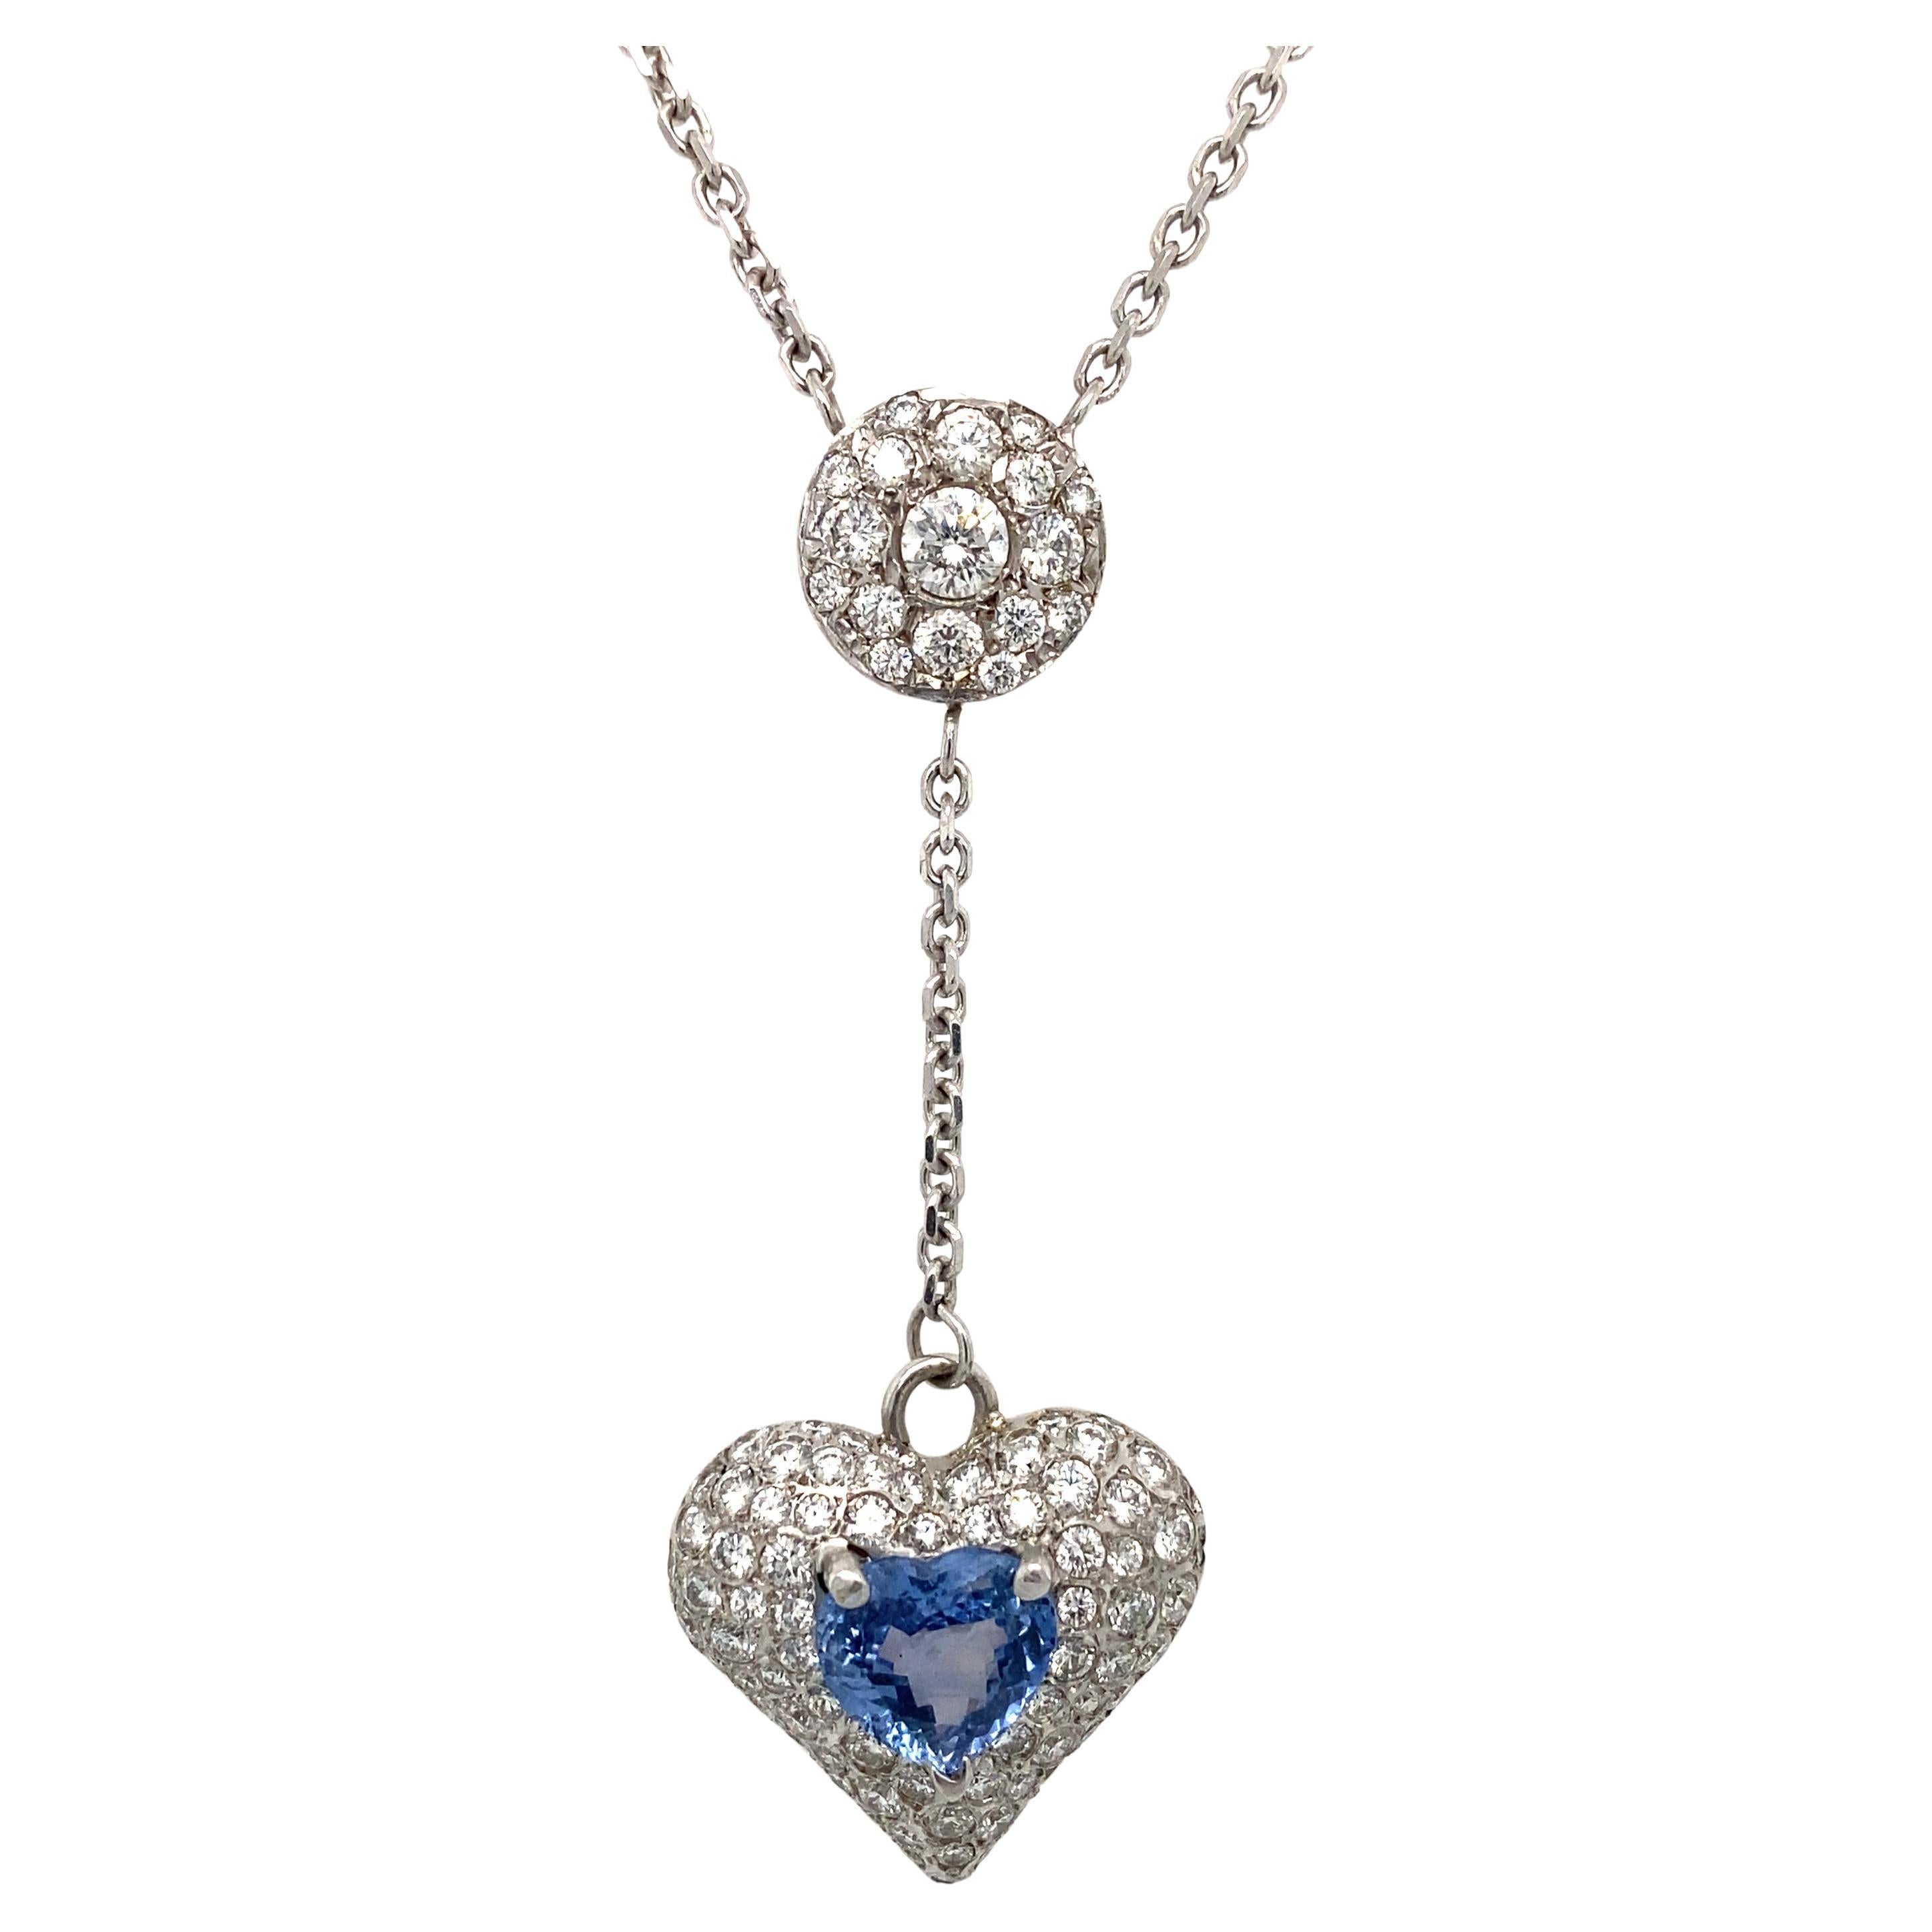 1.30 Carat Heart Cut Sapphire and Diamond Necklace in 14 Karat White Gold